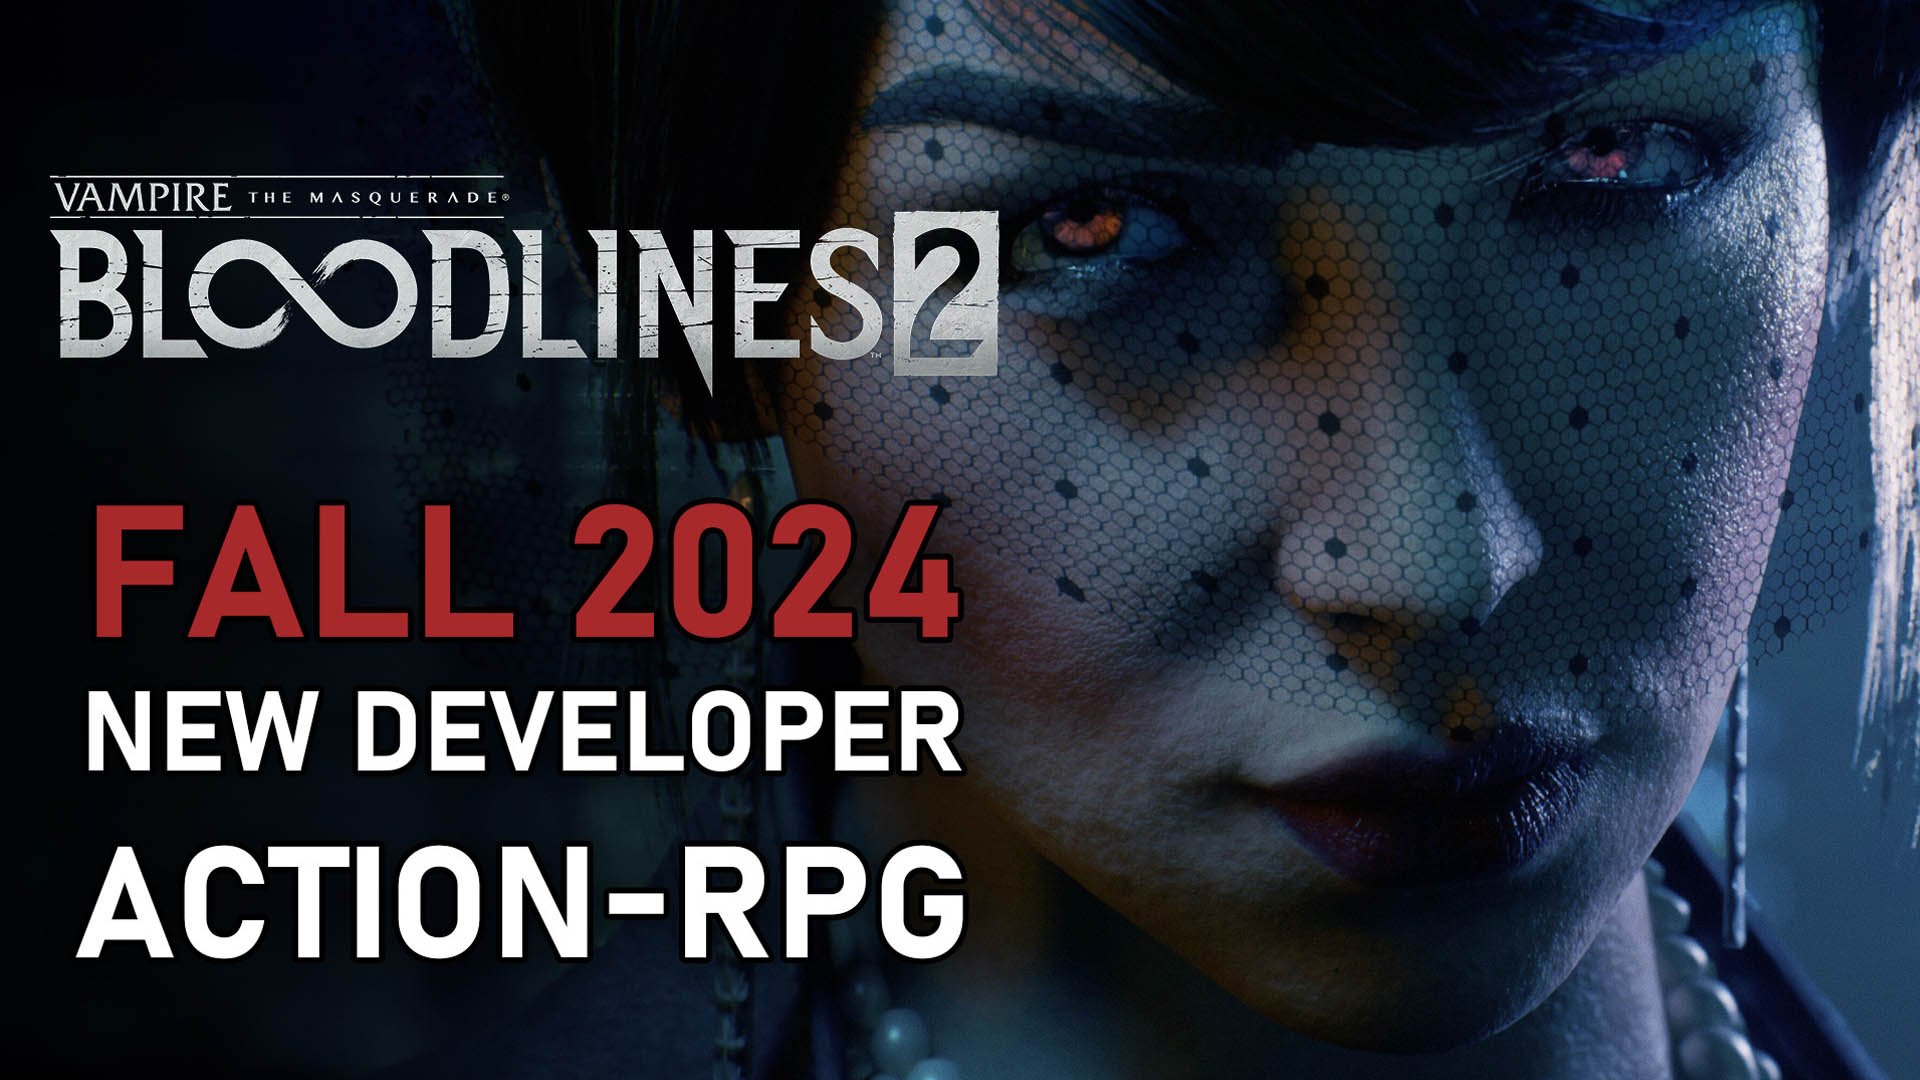 Vampire: The Masquerade - Bloodlines 2 Release in Fall 2024